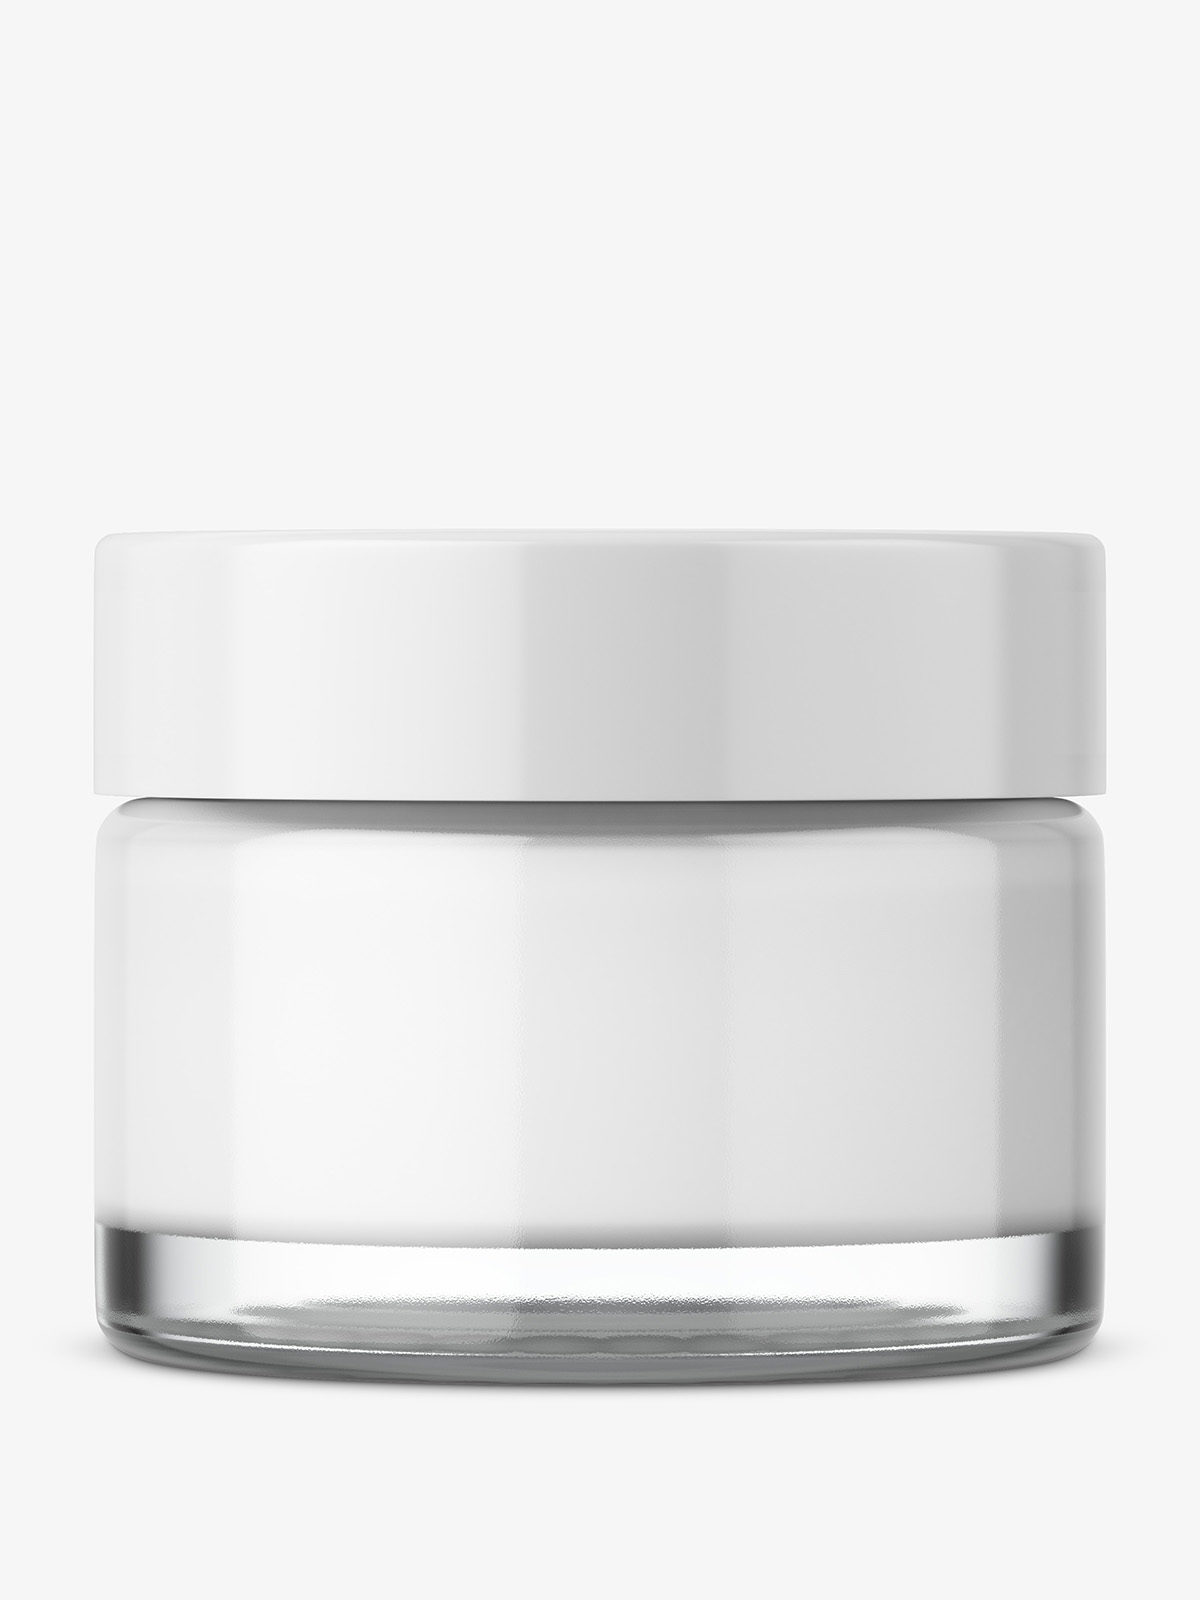 Download Round glass cosmetic jar - Smarty Mockups